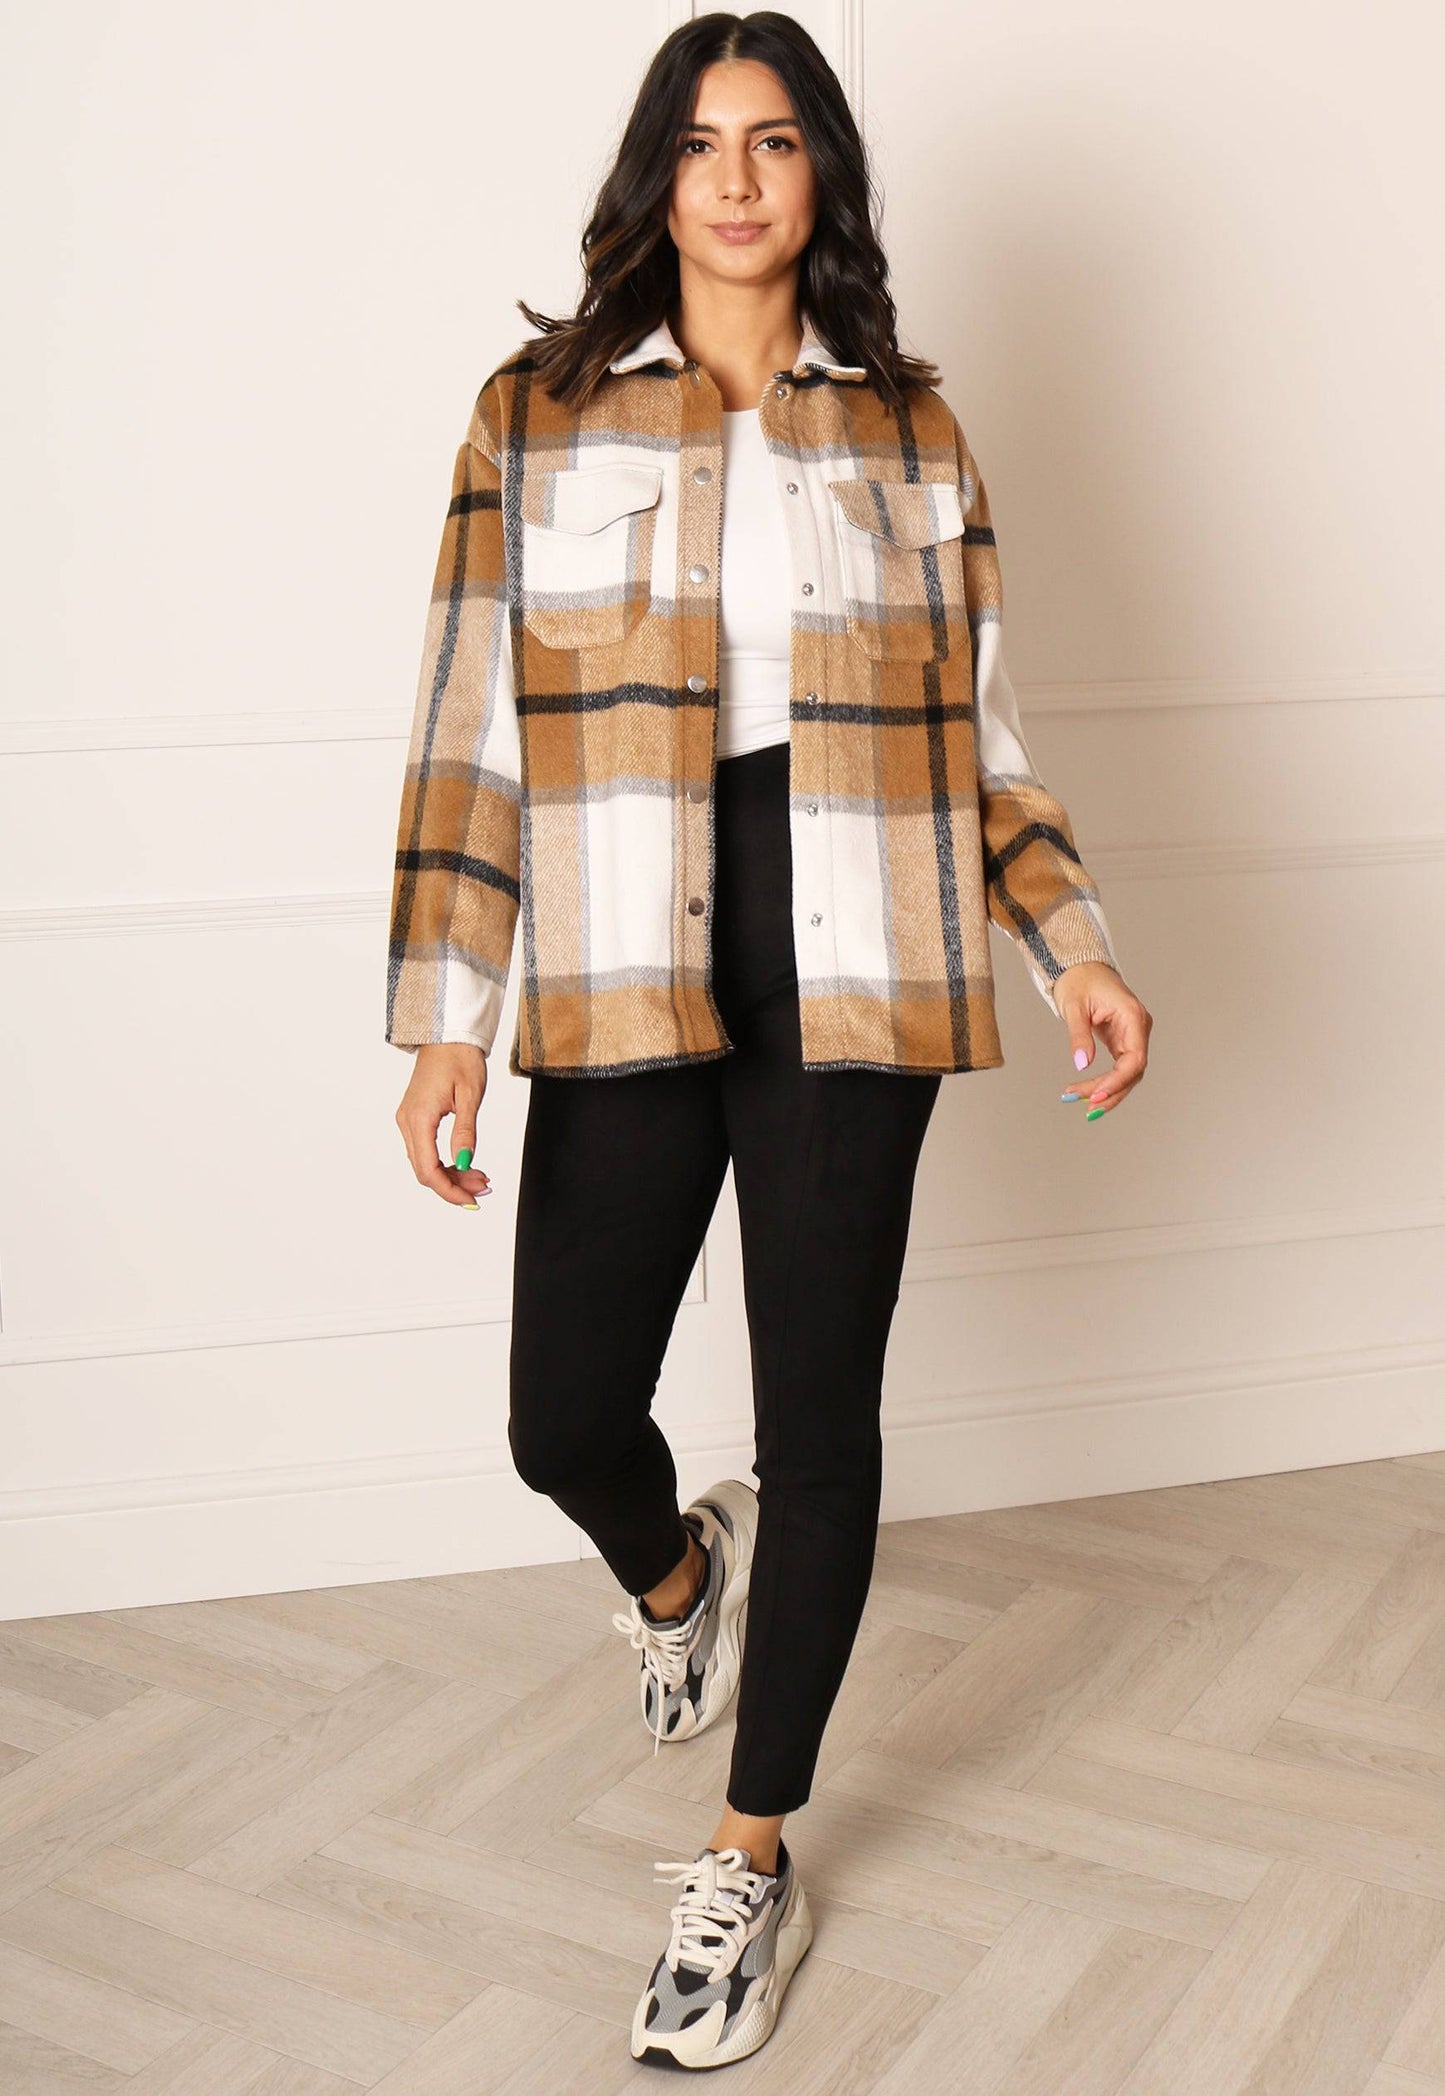 ONLY Maci Oversized Brushed Check Shacket with Curve Hem in Brown & White - concretebartops